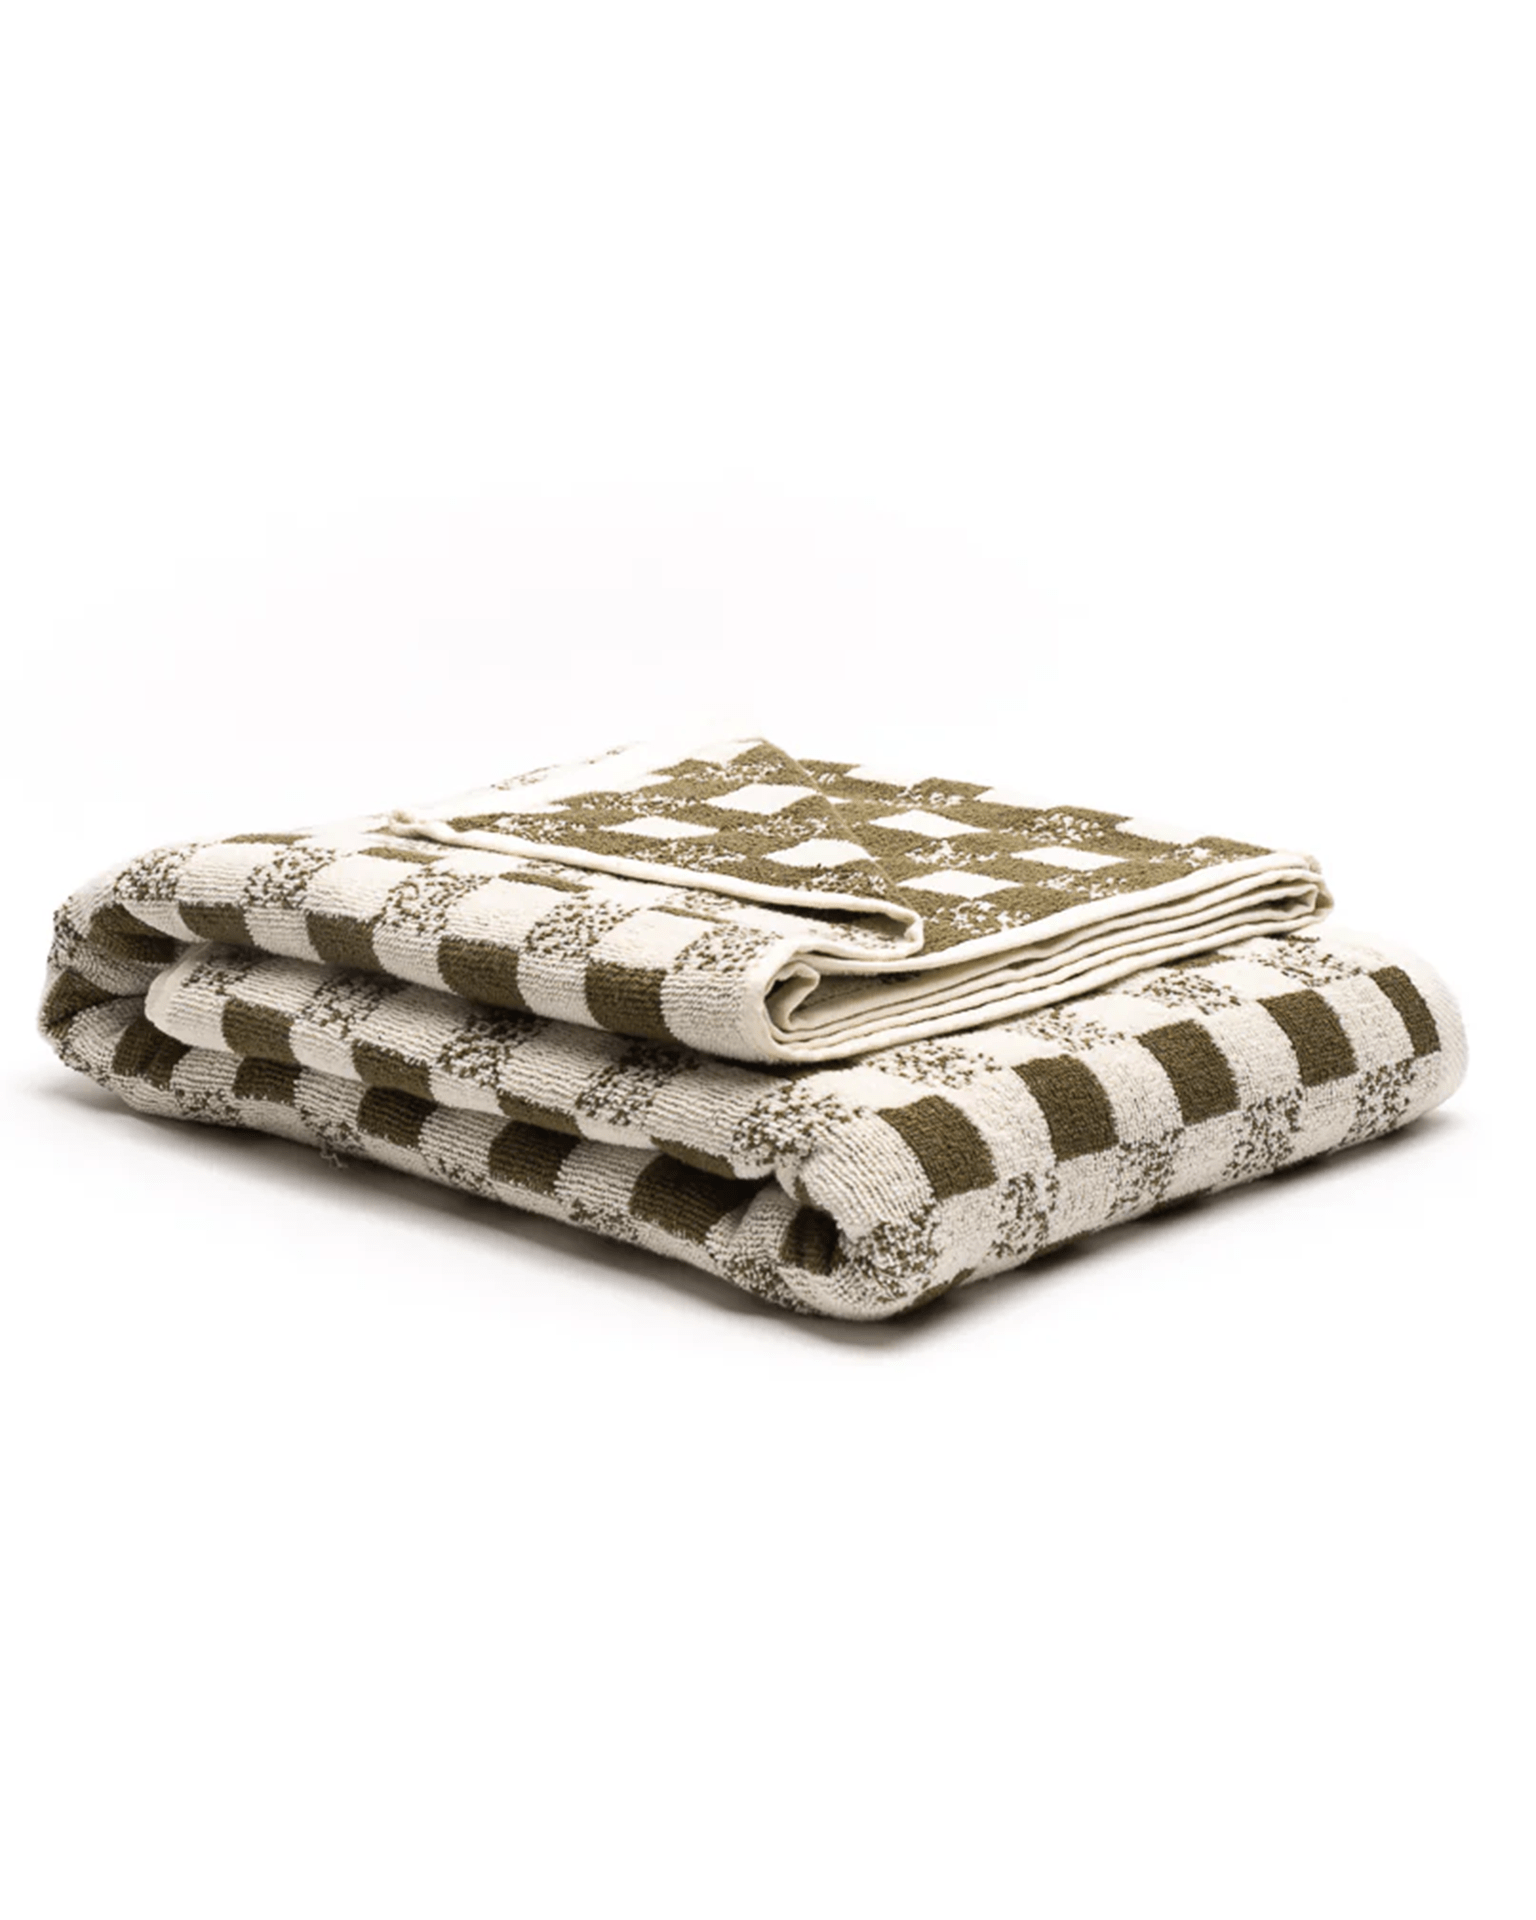 https://cdn.shopify.com/s/files/1/0003/5871/1337/files/bliss-bouqitues-house-no-23-monroe-towel-in-olive-olive-32387567878241_1600x.png?v=1684820753